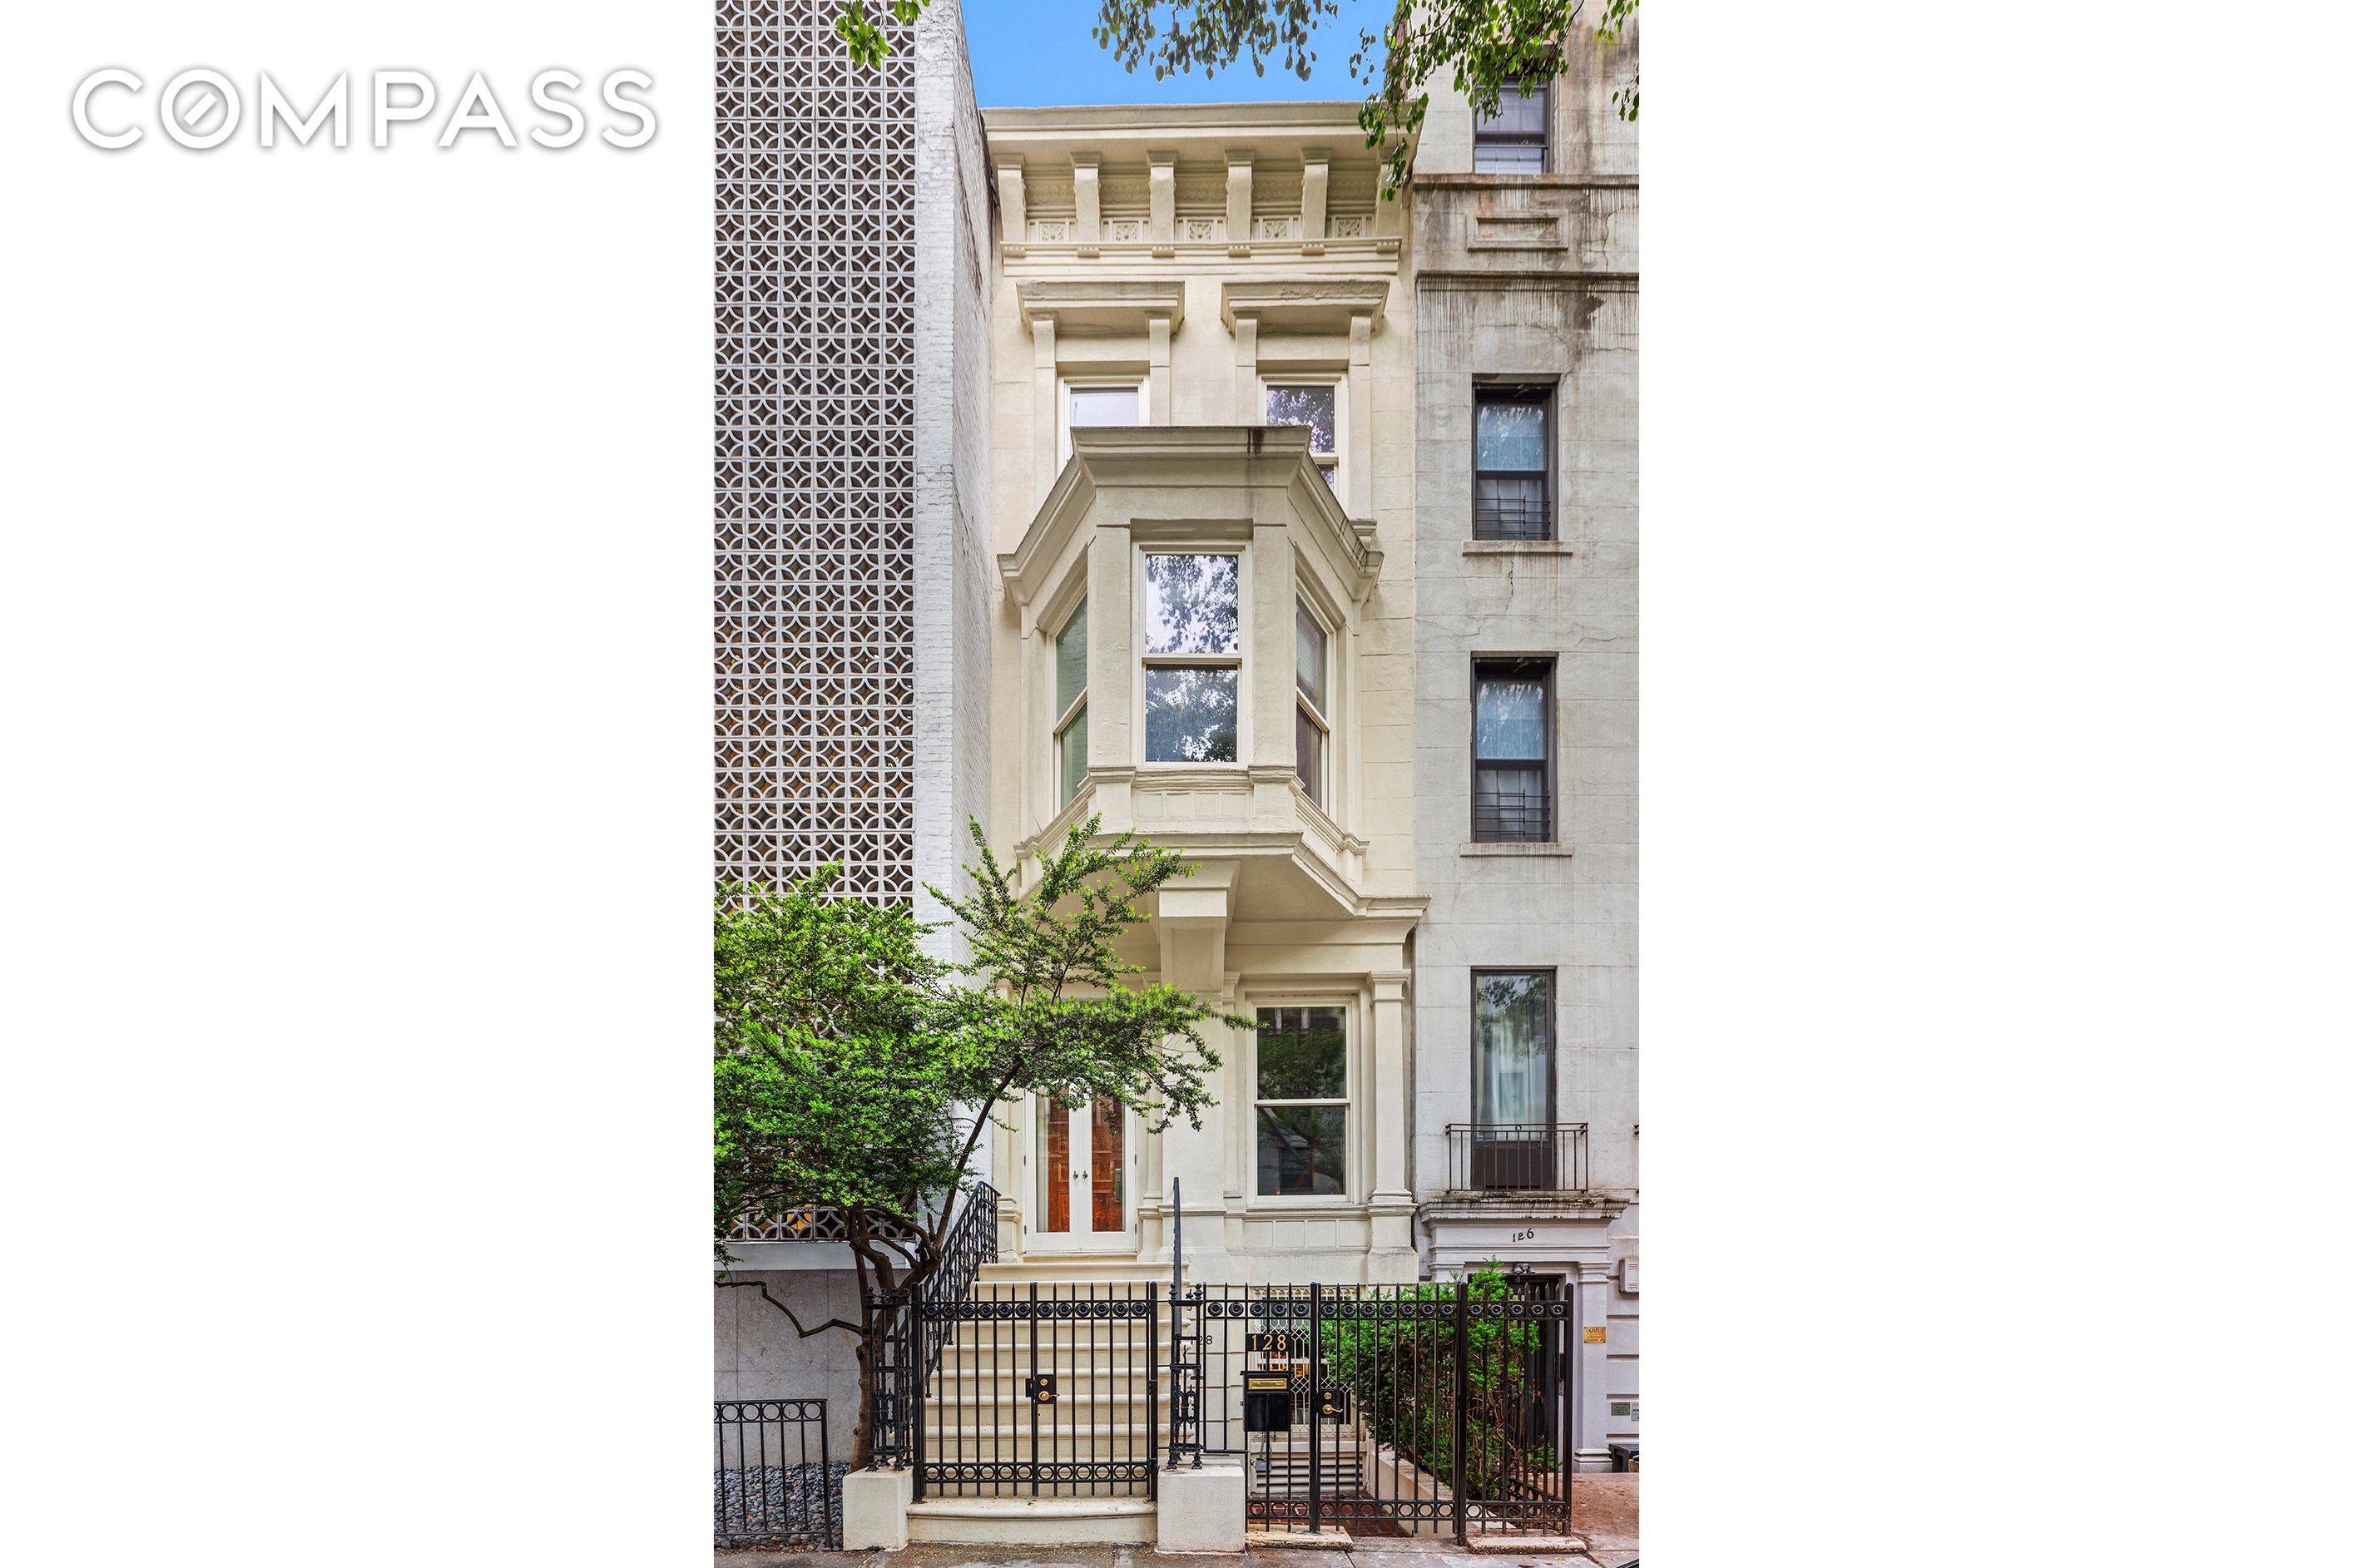 Perfectly located on a serene Upper East Side street, this charming neo Grec style home is generously configured for entertaining as well as for comfortable day to day living.